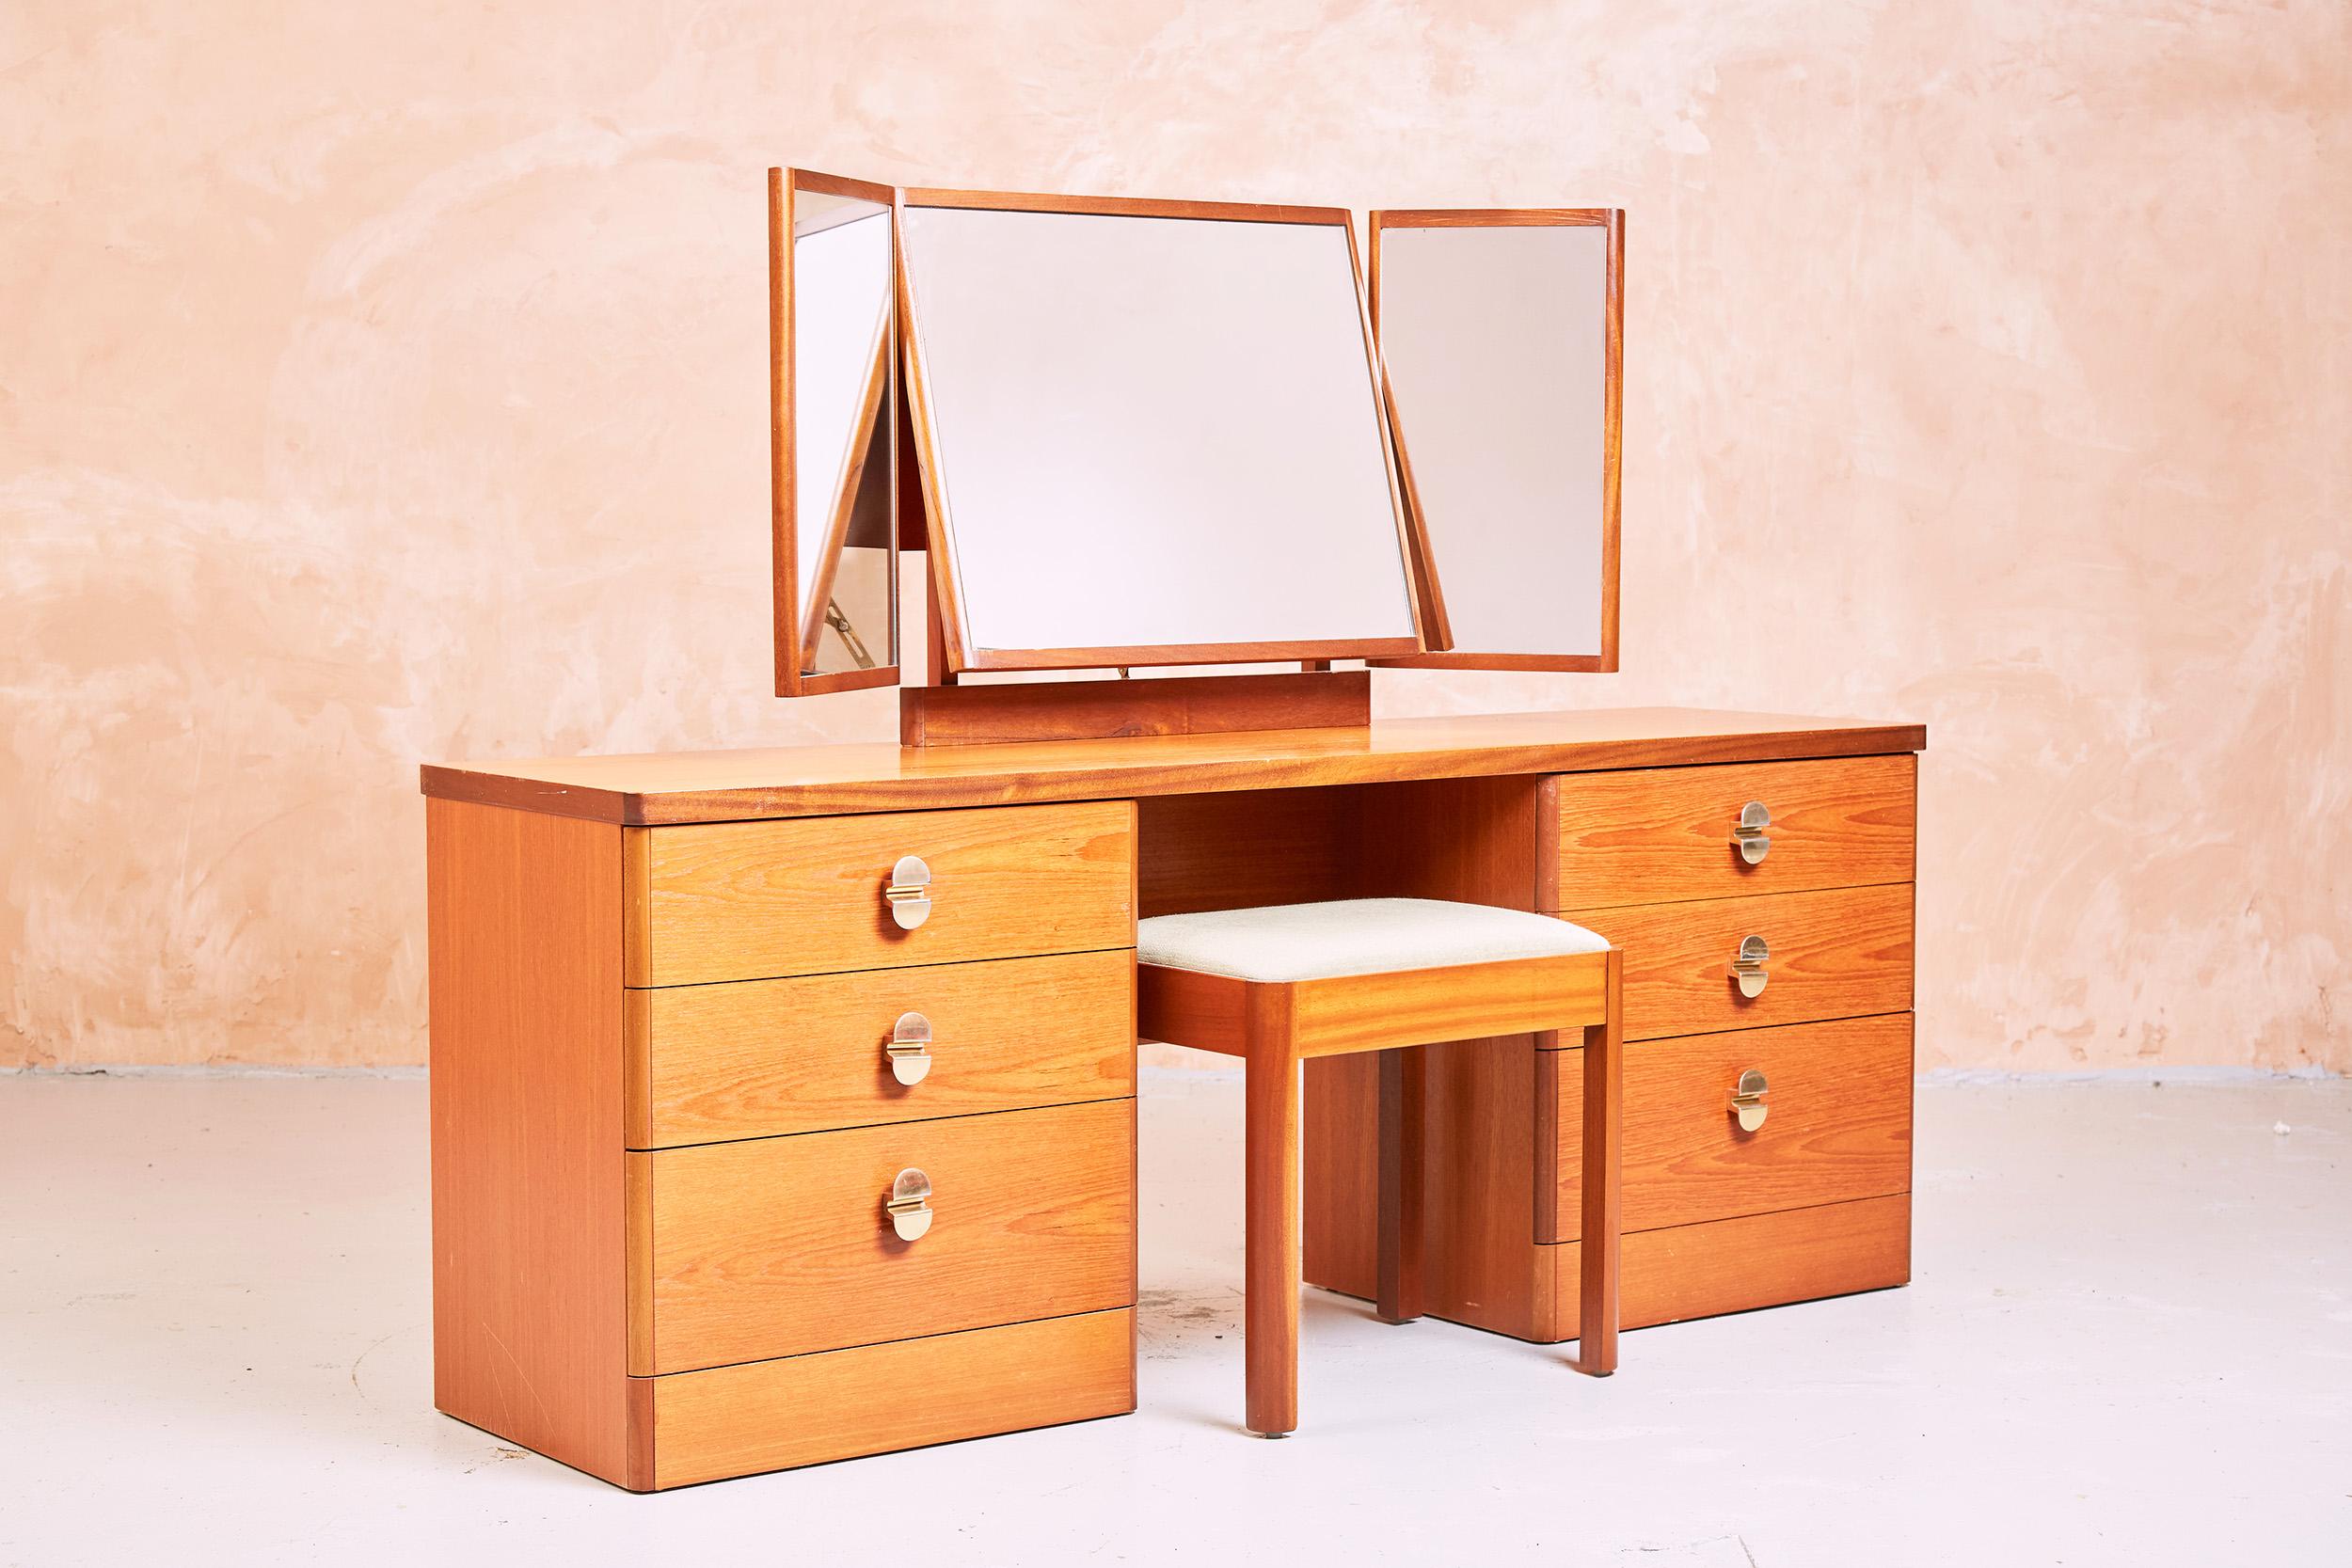 Mid Century Teak Stag Cantata Dressing Table with Brass Handles and a stool

This is an excellent piece of furniture from the well known and respected manufacturer Stag.

As with all furniture produced by Stag this is a well made piece and is from